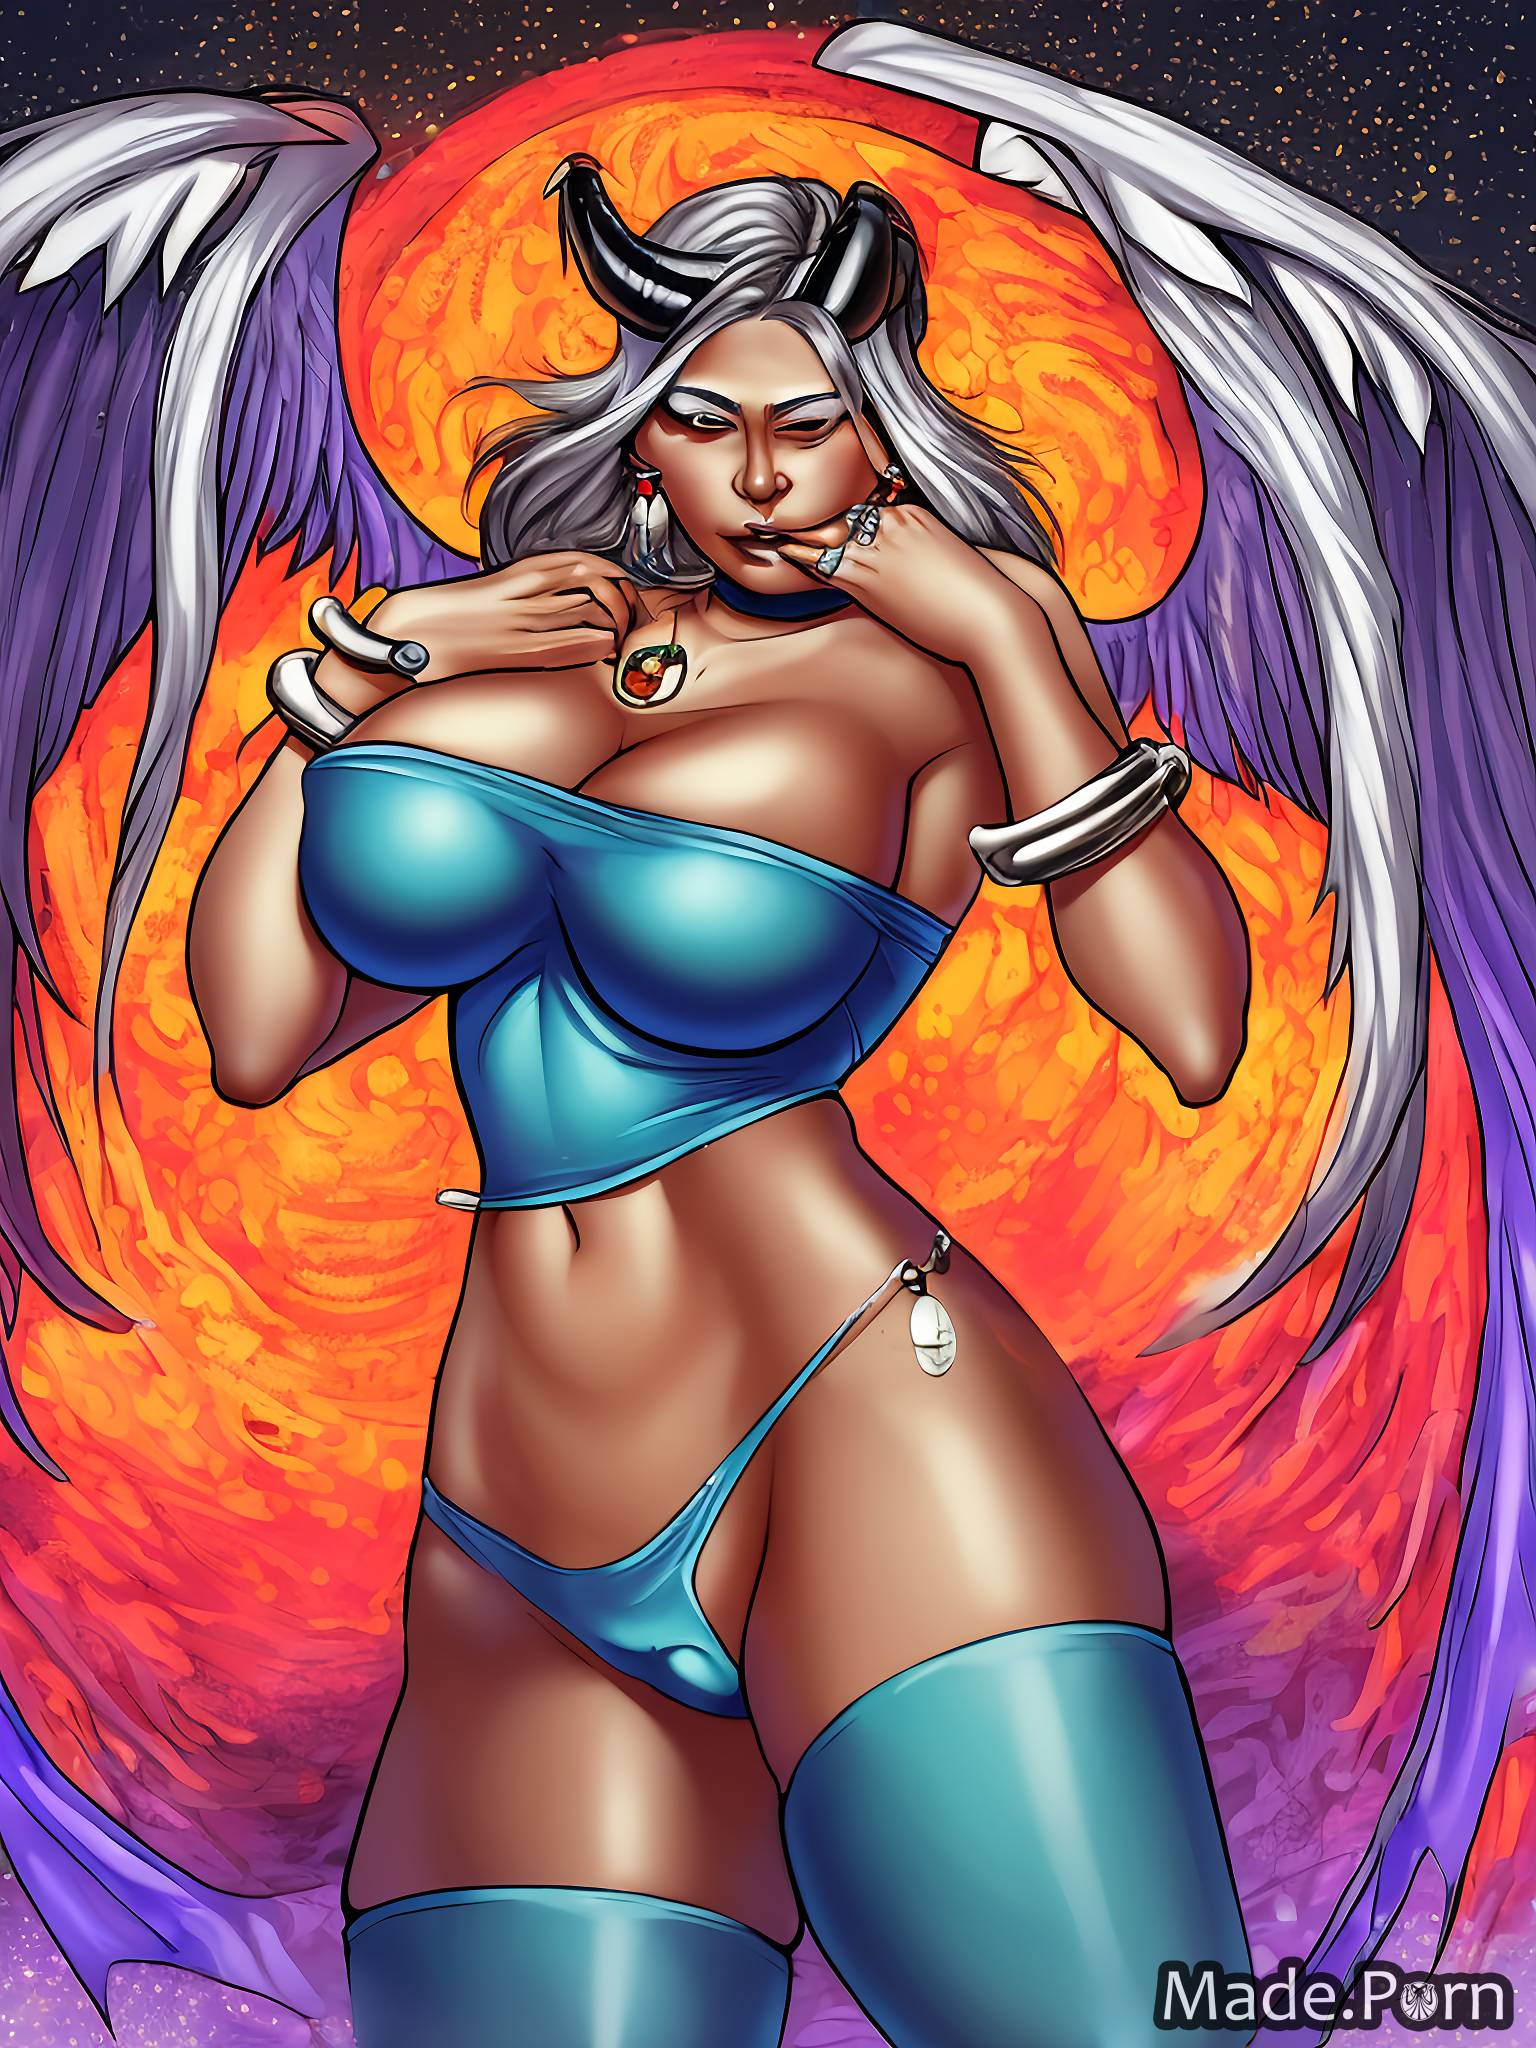 tanned skin demon wings nipples perfect boobs athlete silver white hair